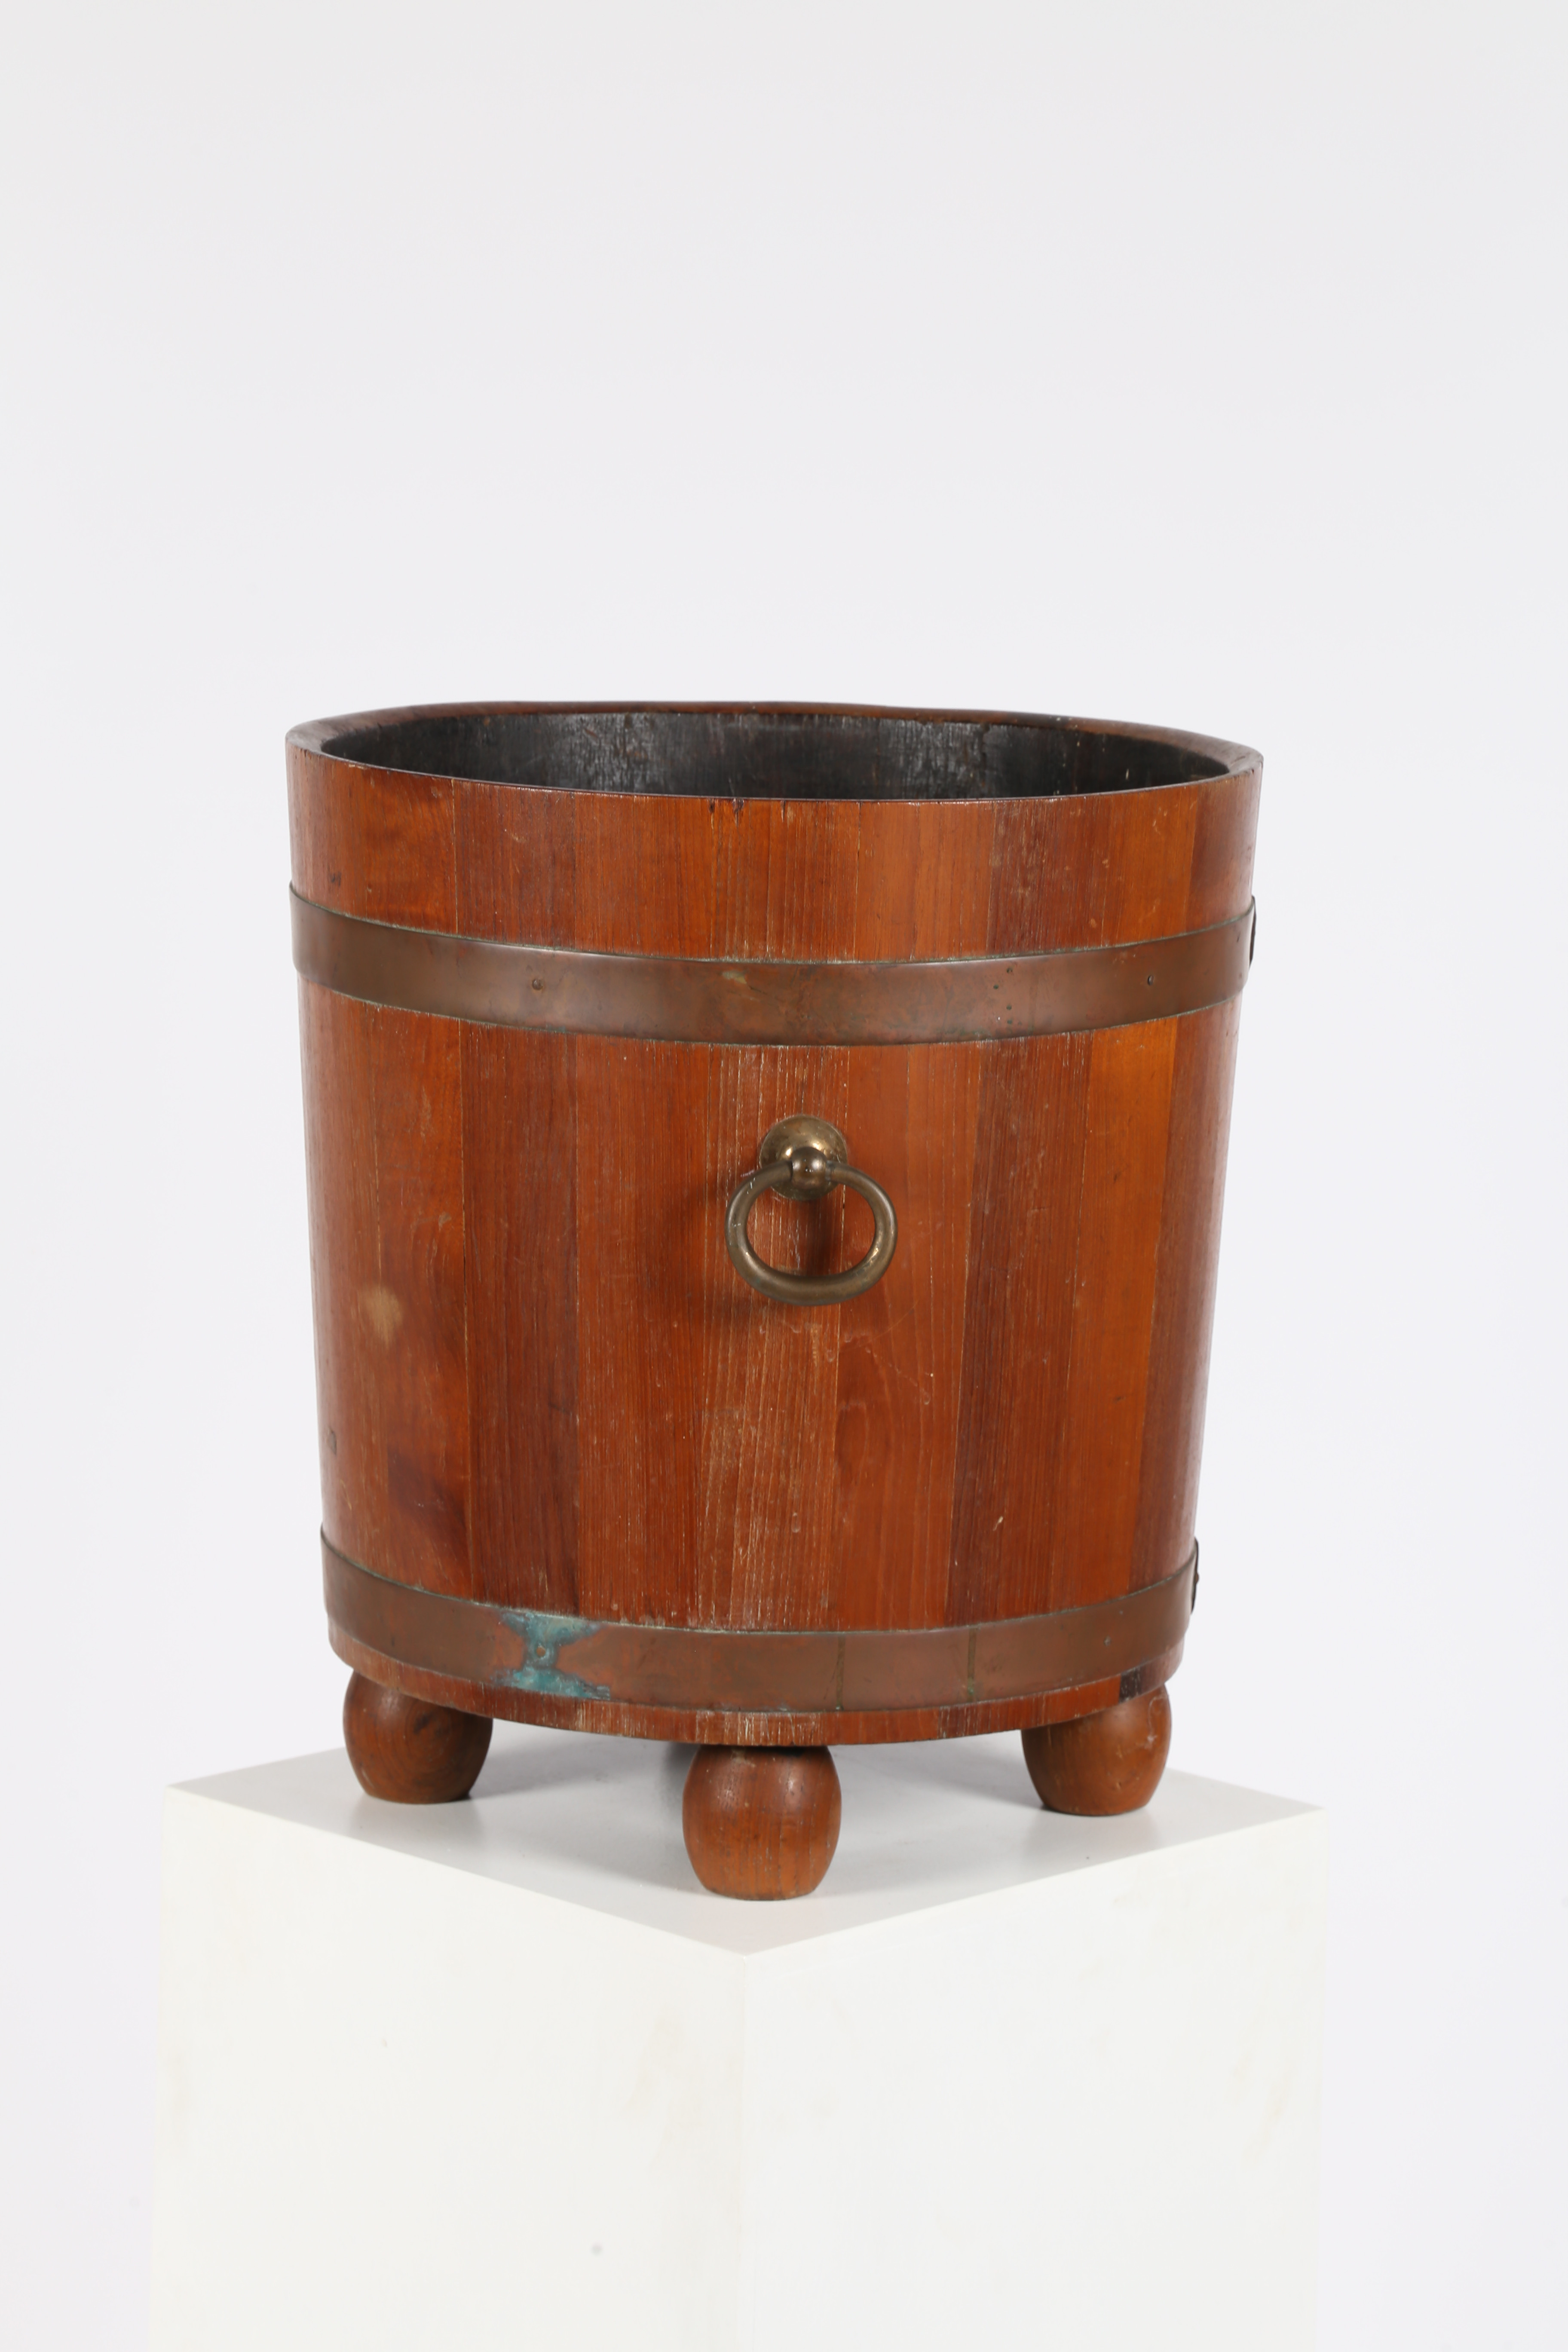 A TEAK AND COPPER BOUND BUCKET, PROBABLY MADE FROM THE TIMBER OF AN OLD SHIP. - Image 5 of 7